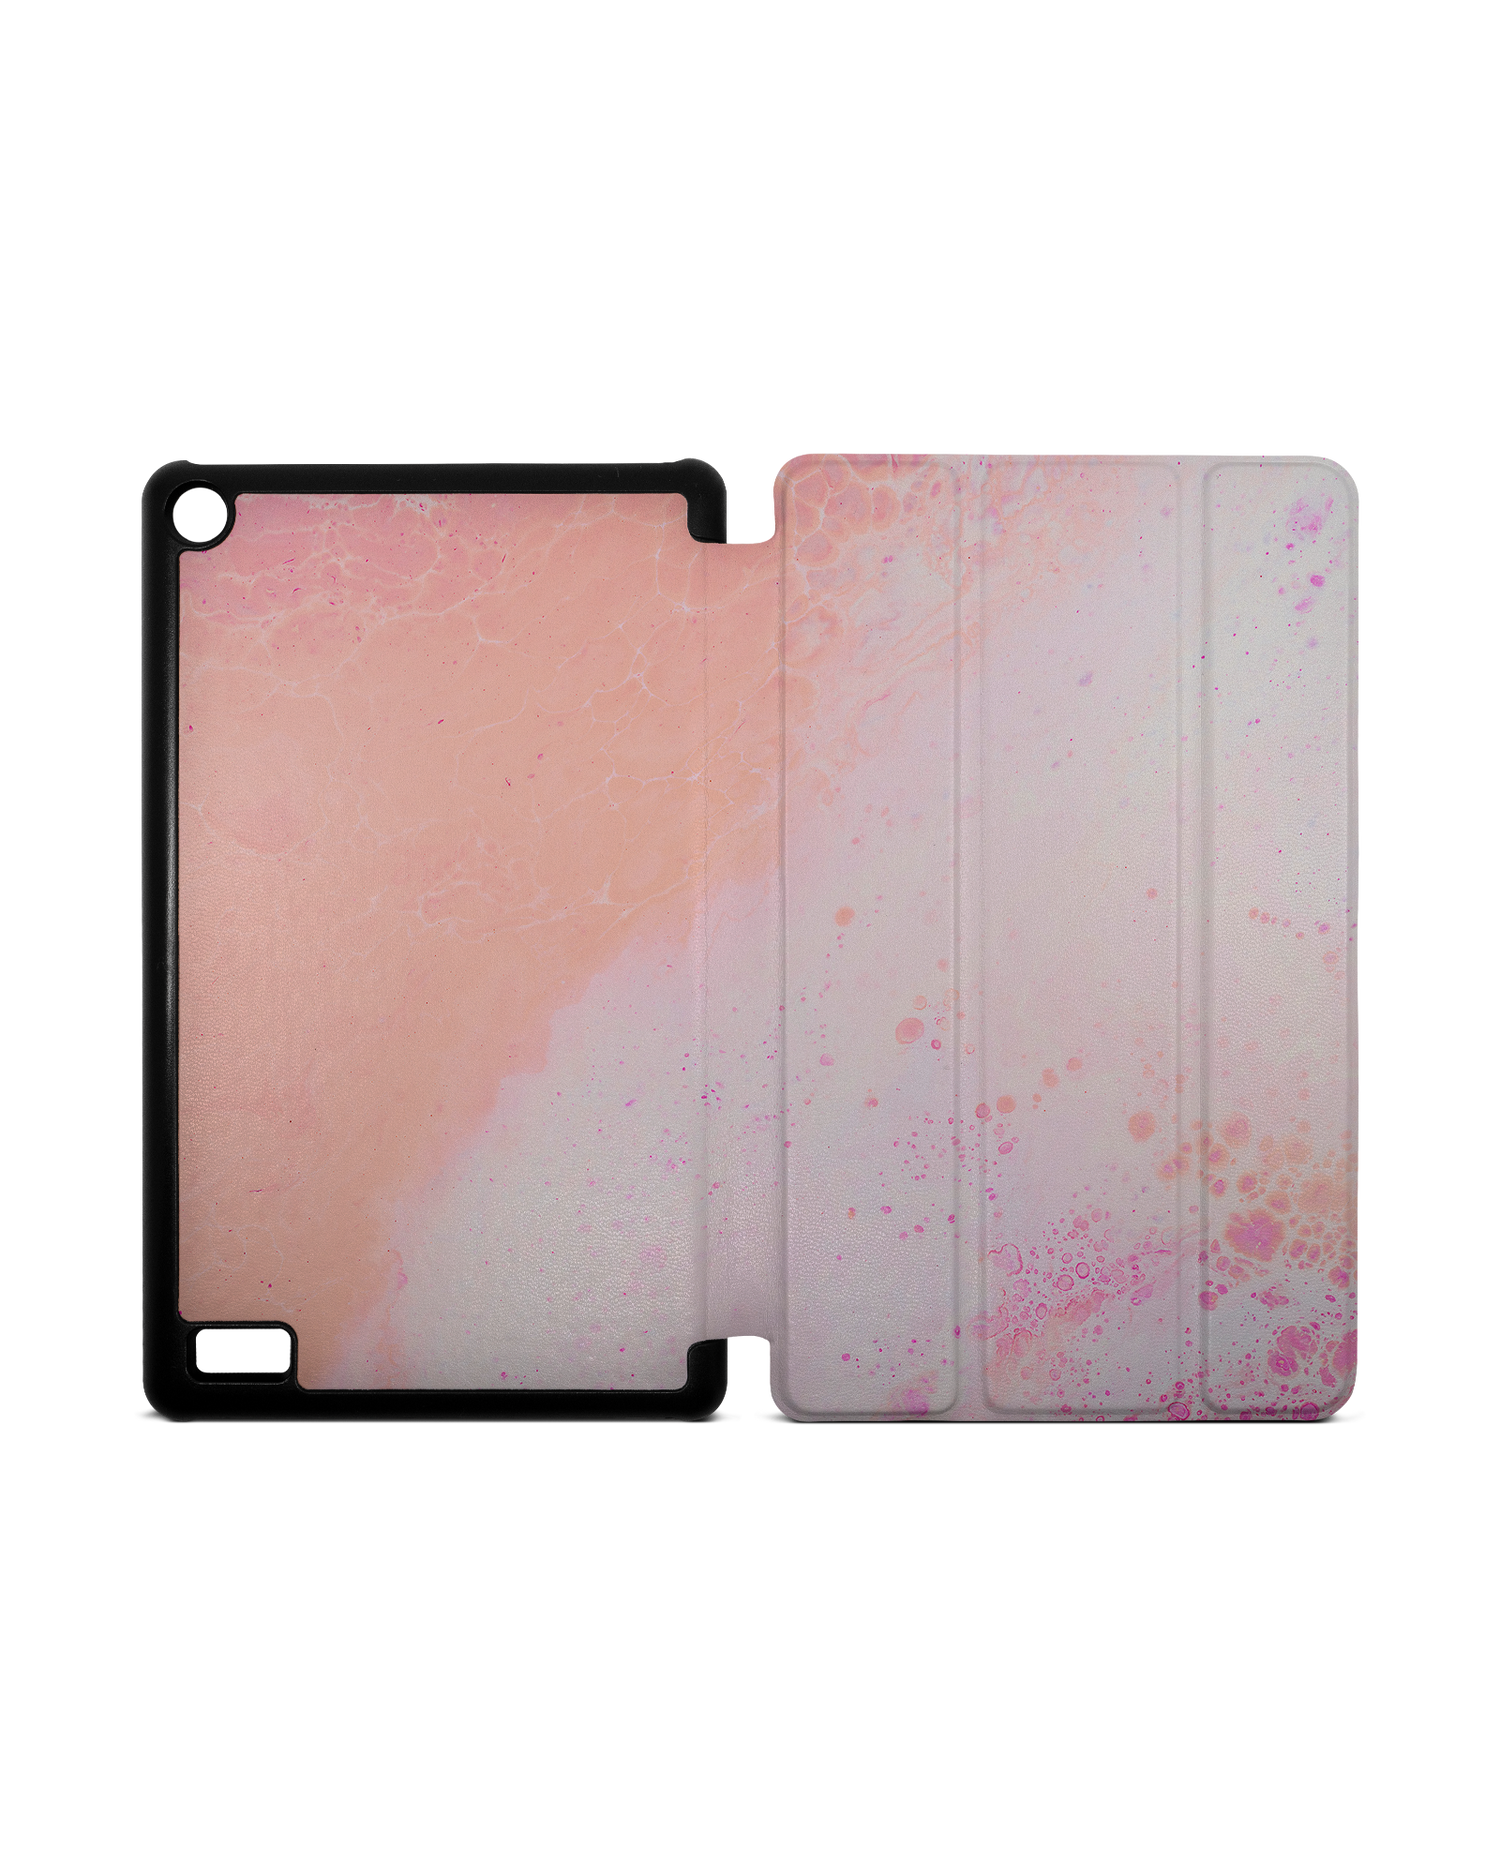 Peaches & Cream Marble Tablet Smart Case for Amazon Fire 7: Opened